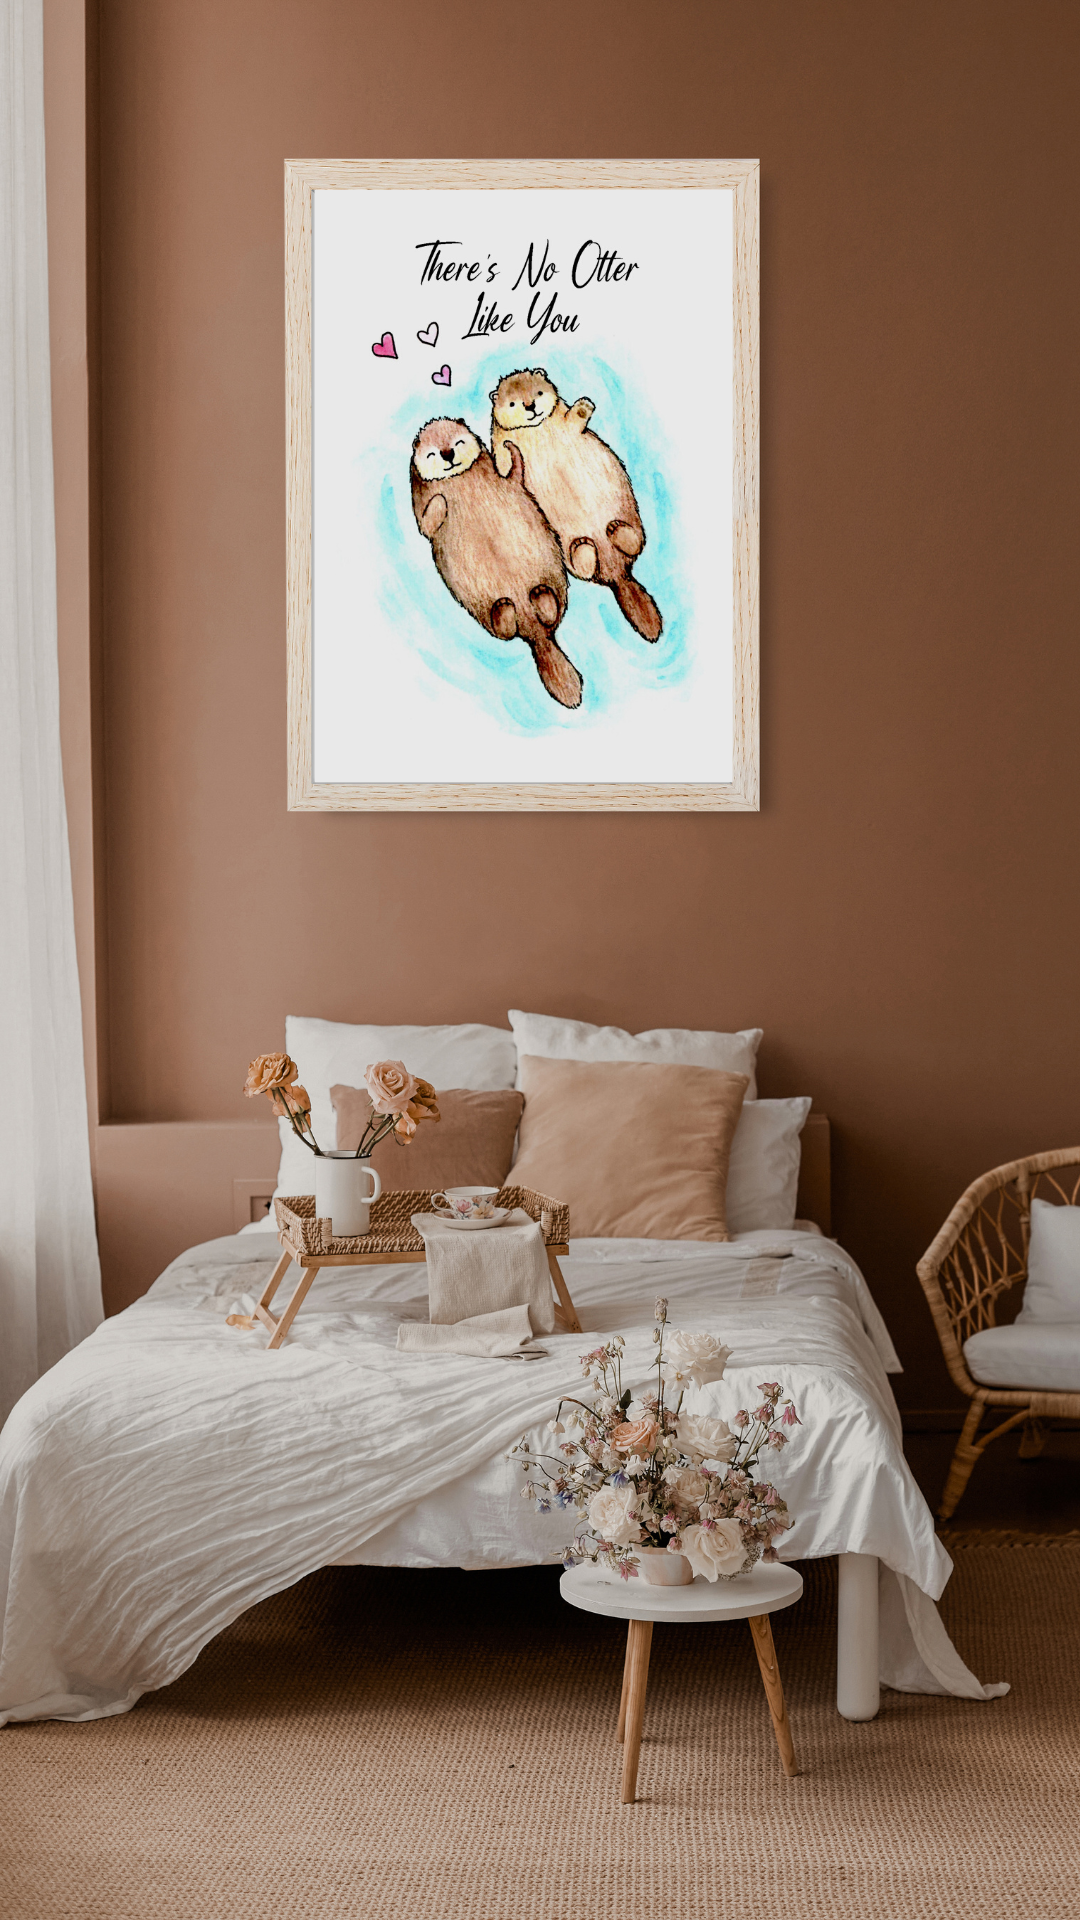 There's no otter like you, Cute otter decor, Anniversary gift, Home decor, Otter art print, Gift for her, Gift for wife, Bedroom decor